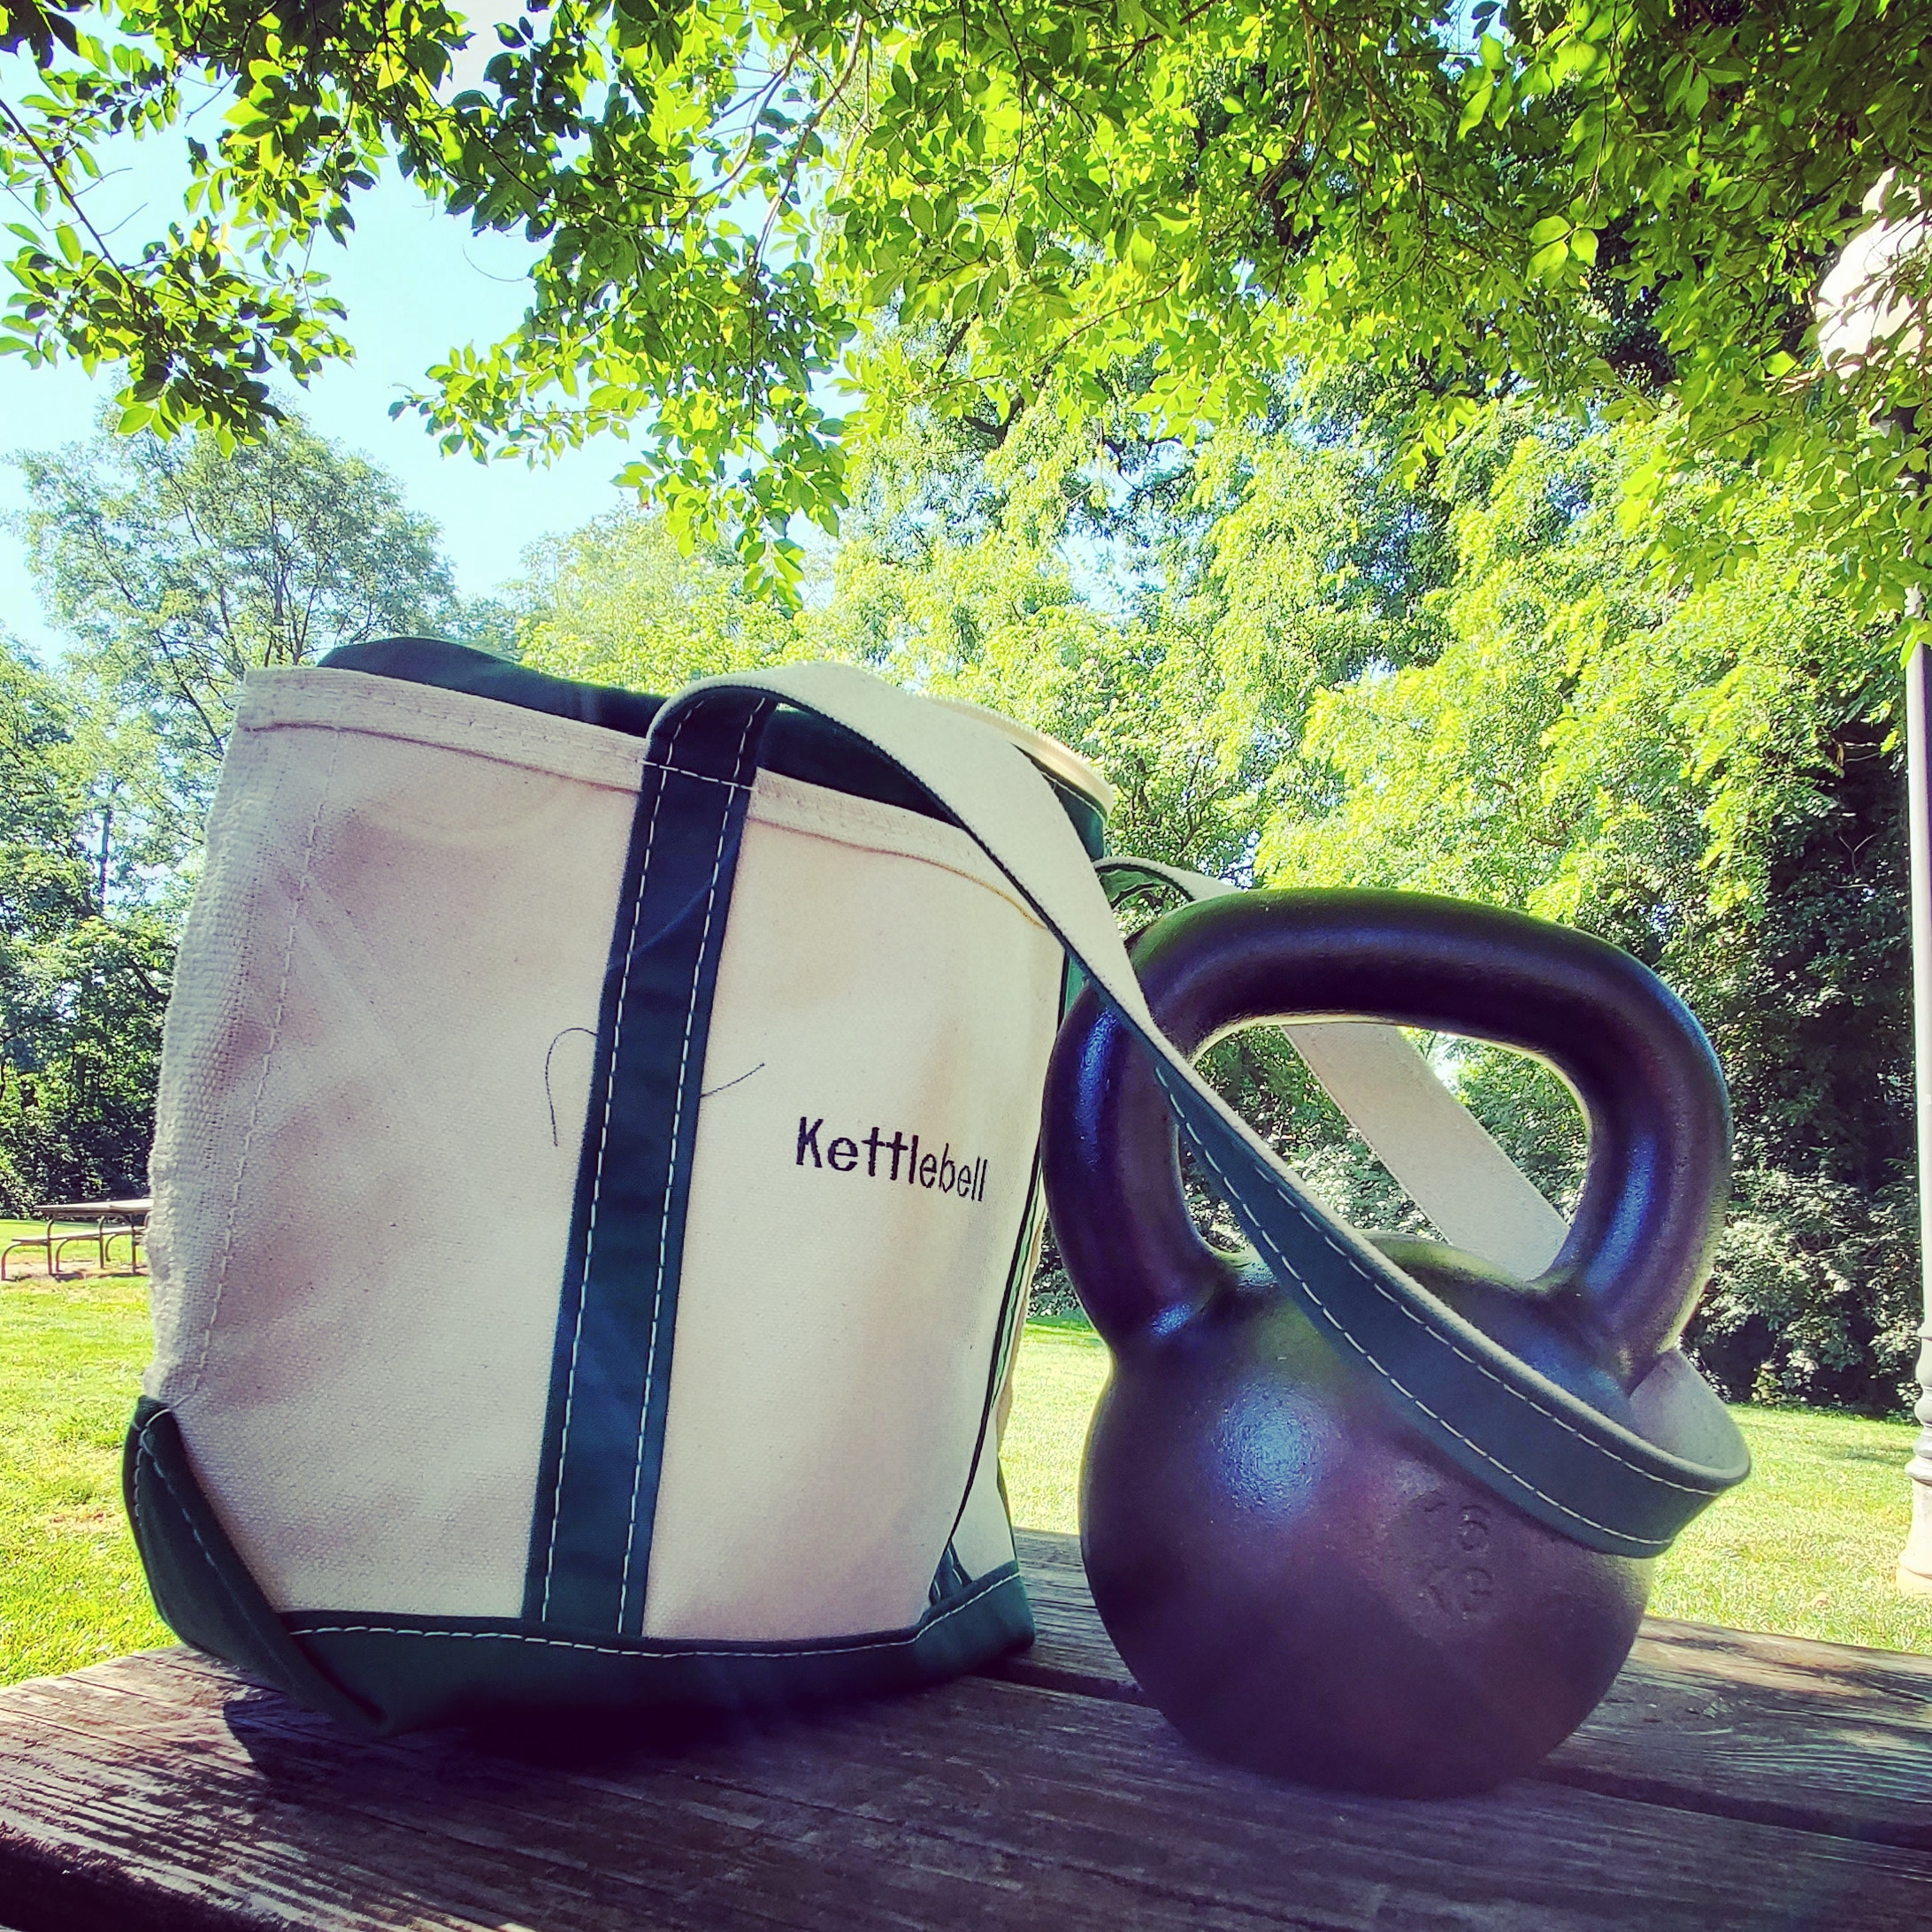 Have kettlebell, will tote